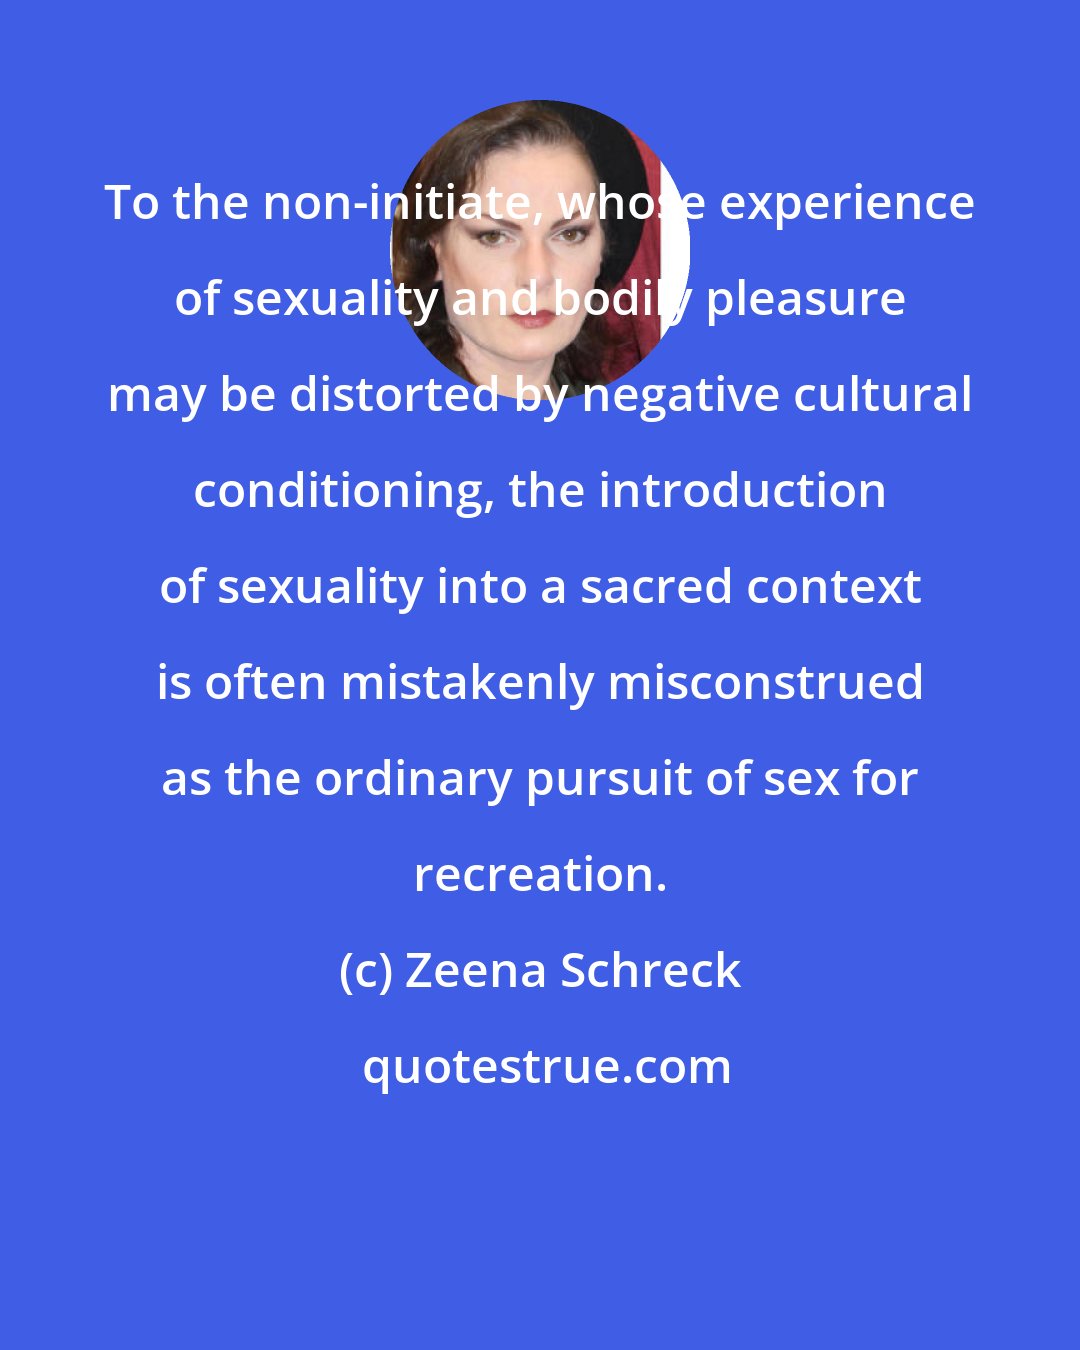 Zeena Schreck: To the non-initiate, whose experience of sexuality and bodily pleasure may be distorted by negative cultural conditioning, the introduction of sexuality into a sacred context is often mistakenly misconstrued as the ordinary pursuit of sex for recreation.